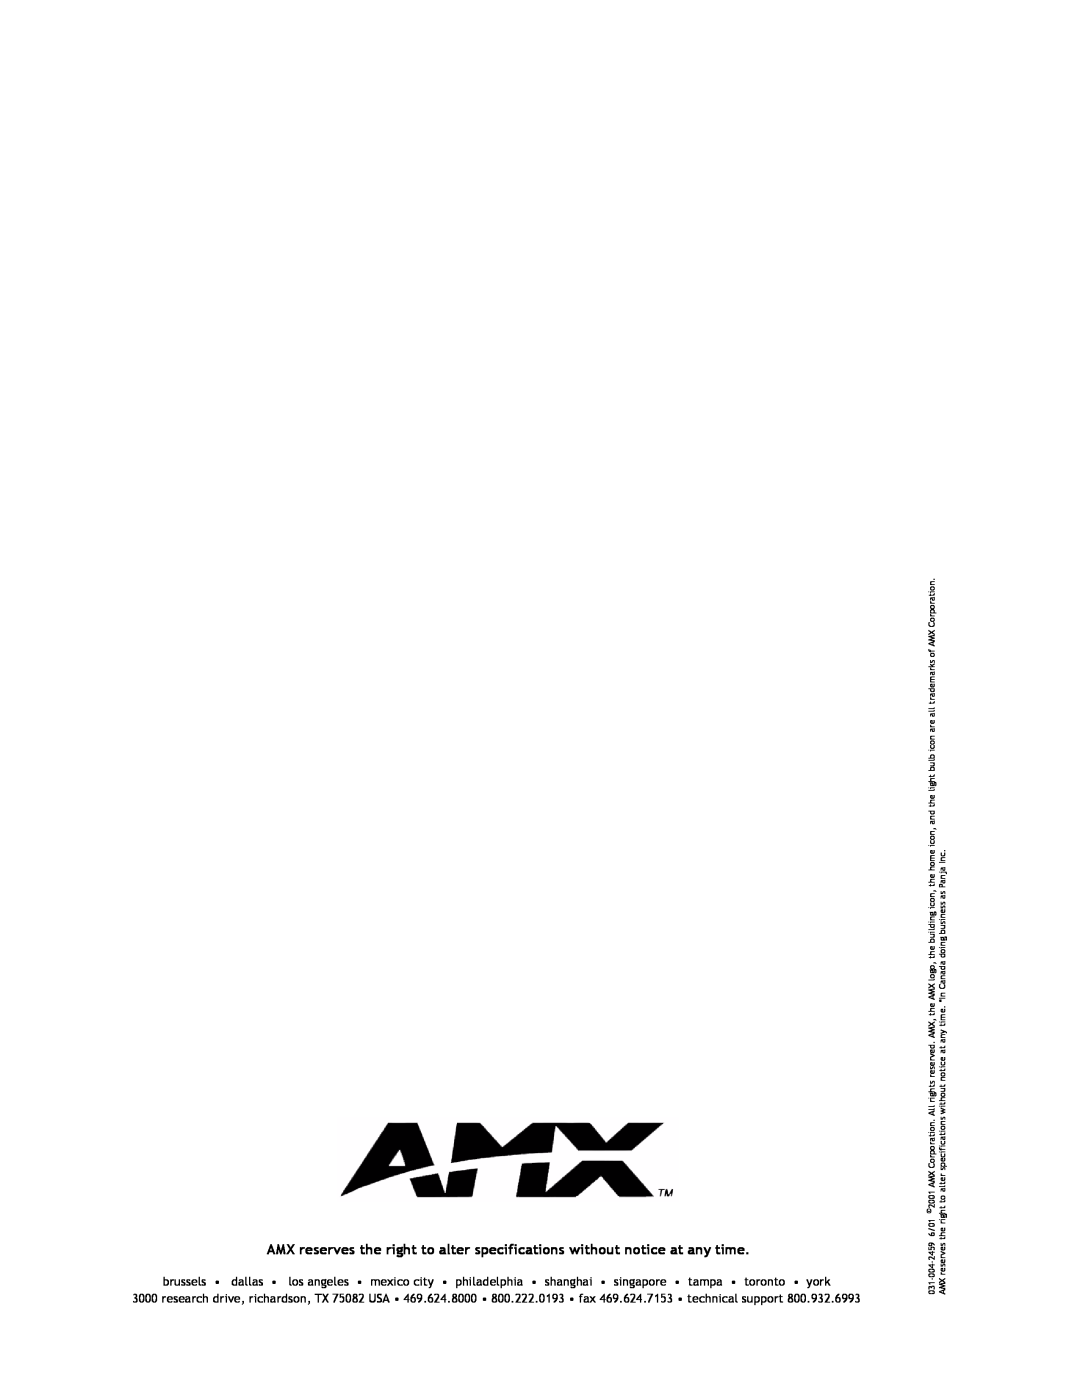 AMX AXC-INP8 Panja Inc, AMX reserves, the building icon, doing business as, AMX logo, In Canada, 2001AMX Corporation, 6/01 